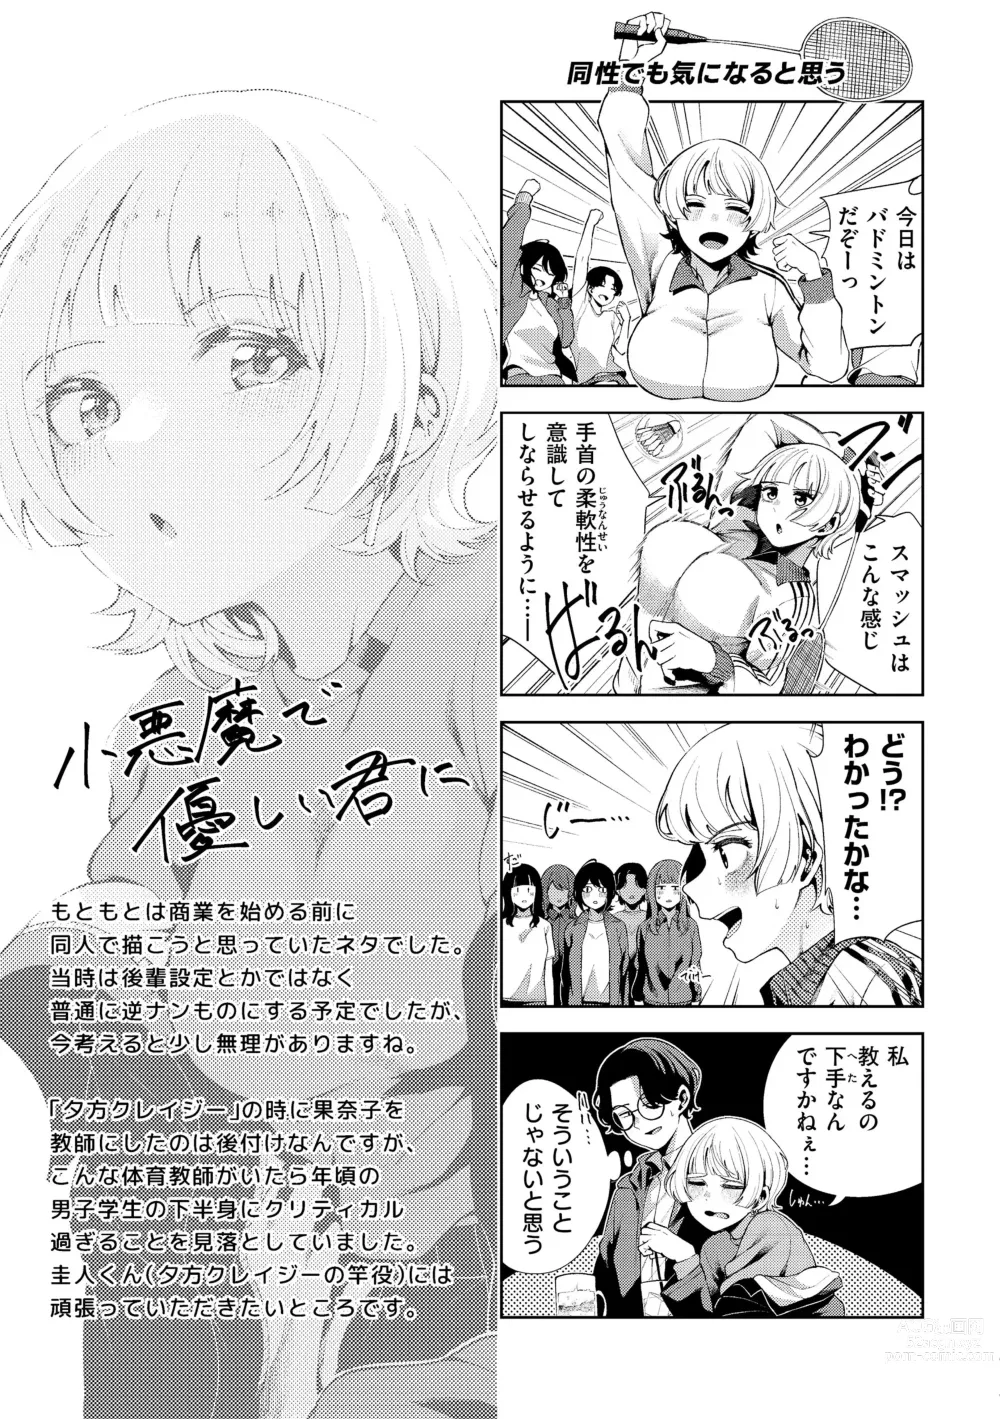 Page 159 of manga Watashi de Sometai - Dyed with Your Color.